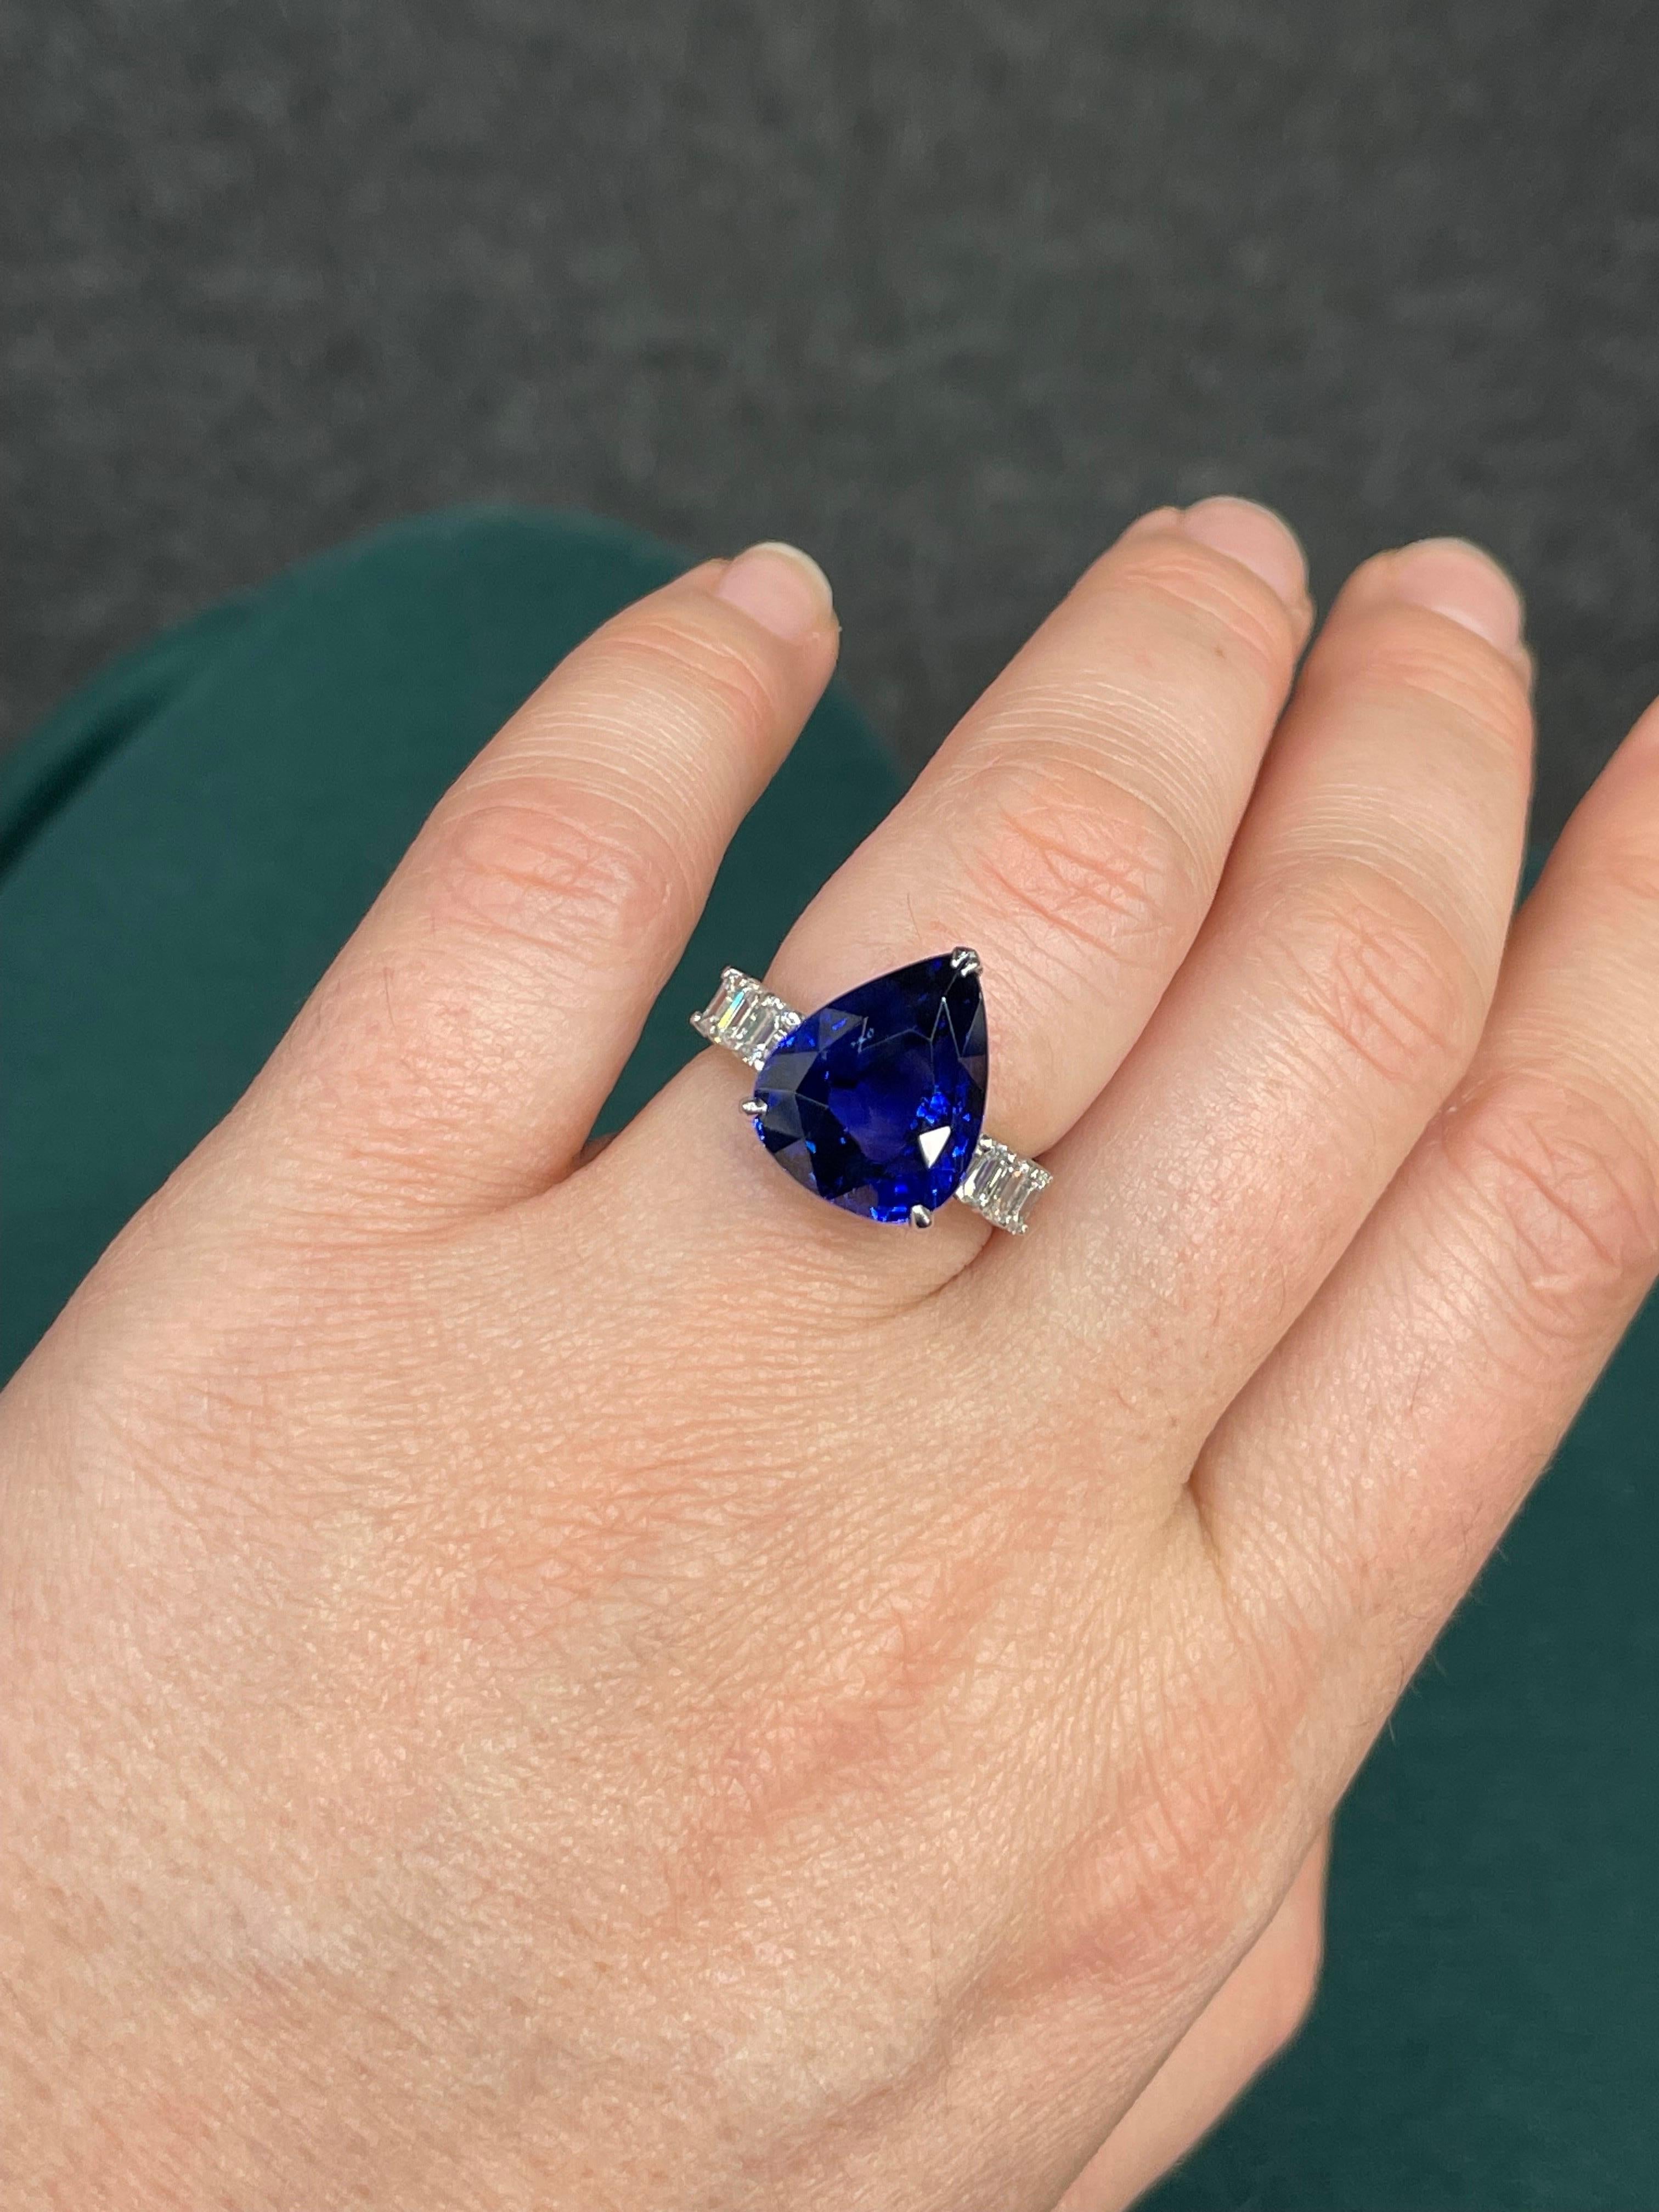 GRS Certified Pear shape natural Sapphire weighing 10.65 Carats, Vivid Blue, flanked with 6 emerald cut diamonds weighing 1 carat. 